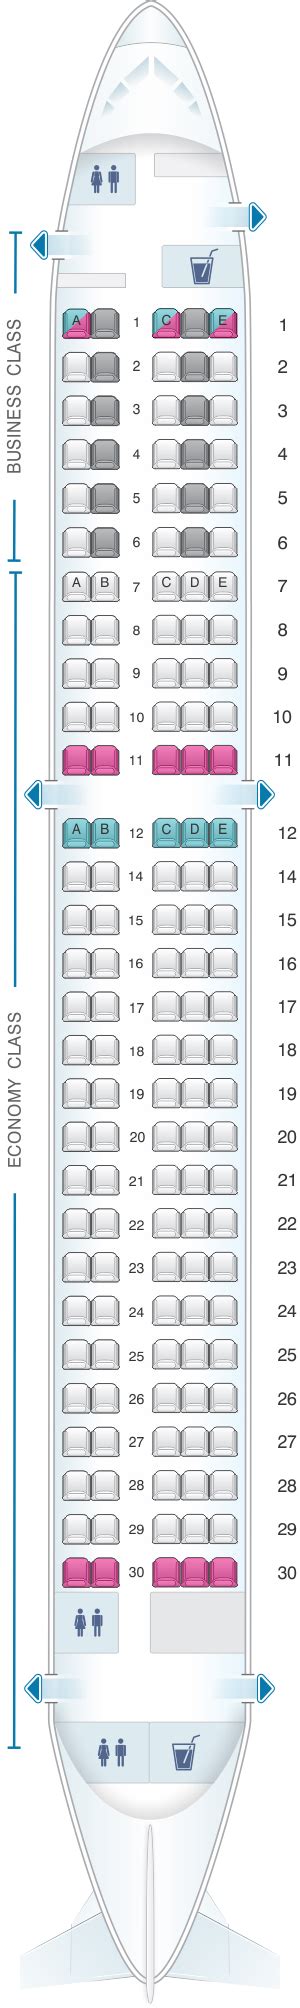 Airbus A220 Jet Seating Chart Image To U